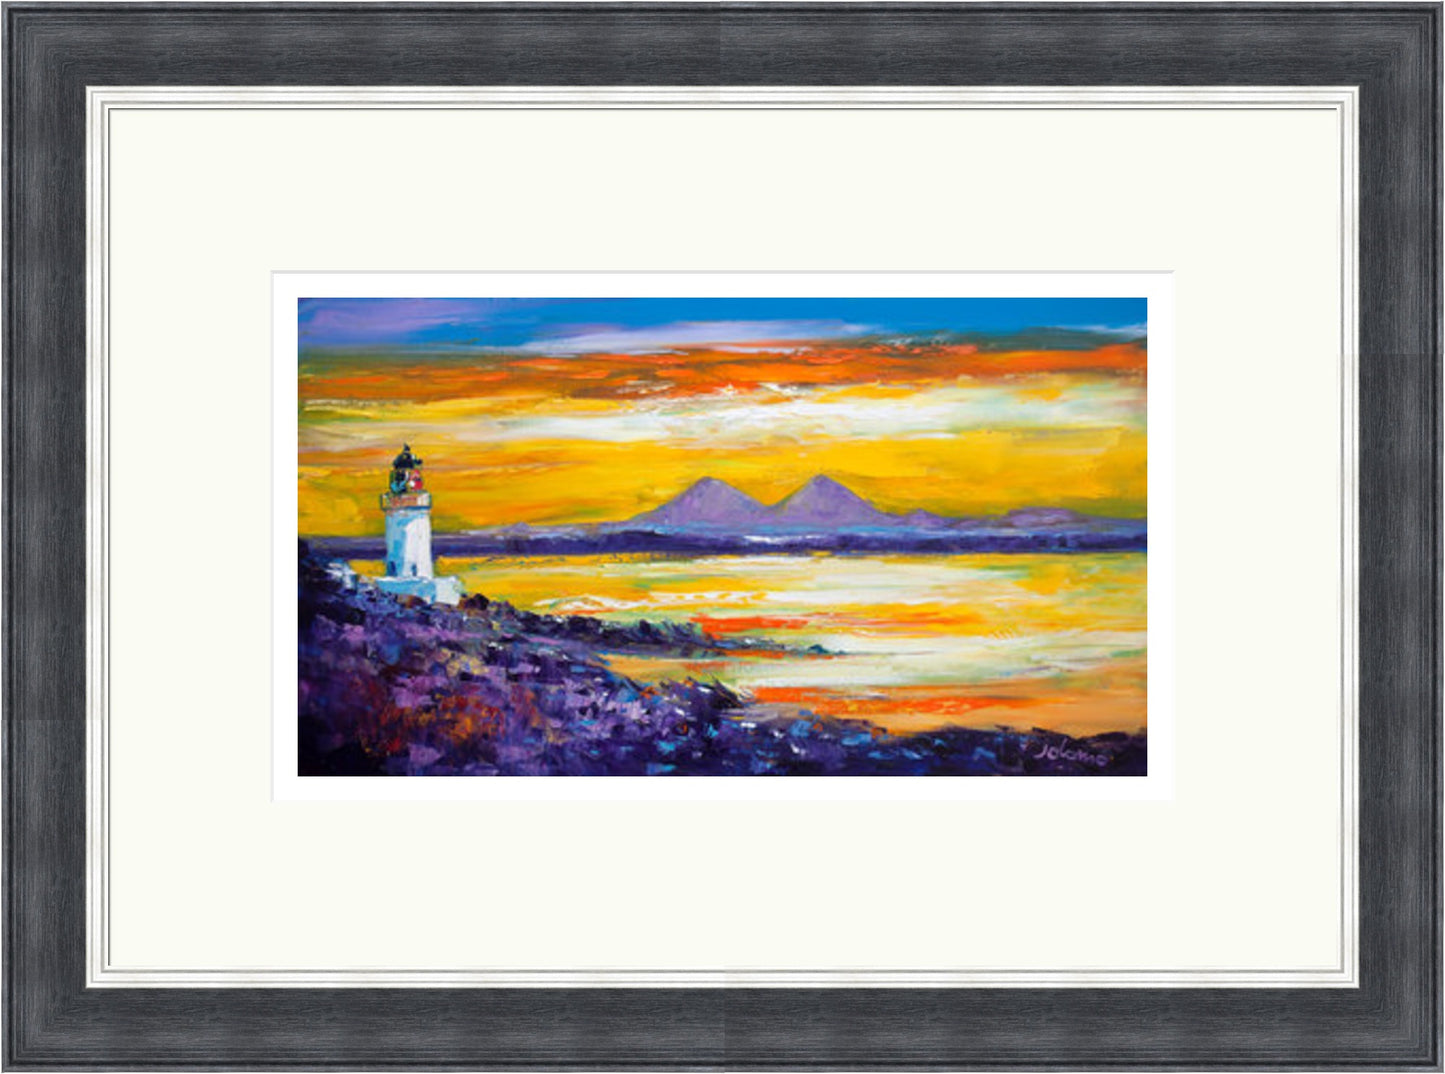 A Soft Dawnlight over Loch Indaal, Islay by John Lowrie Morrison (JOLOMO)